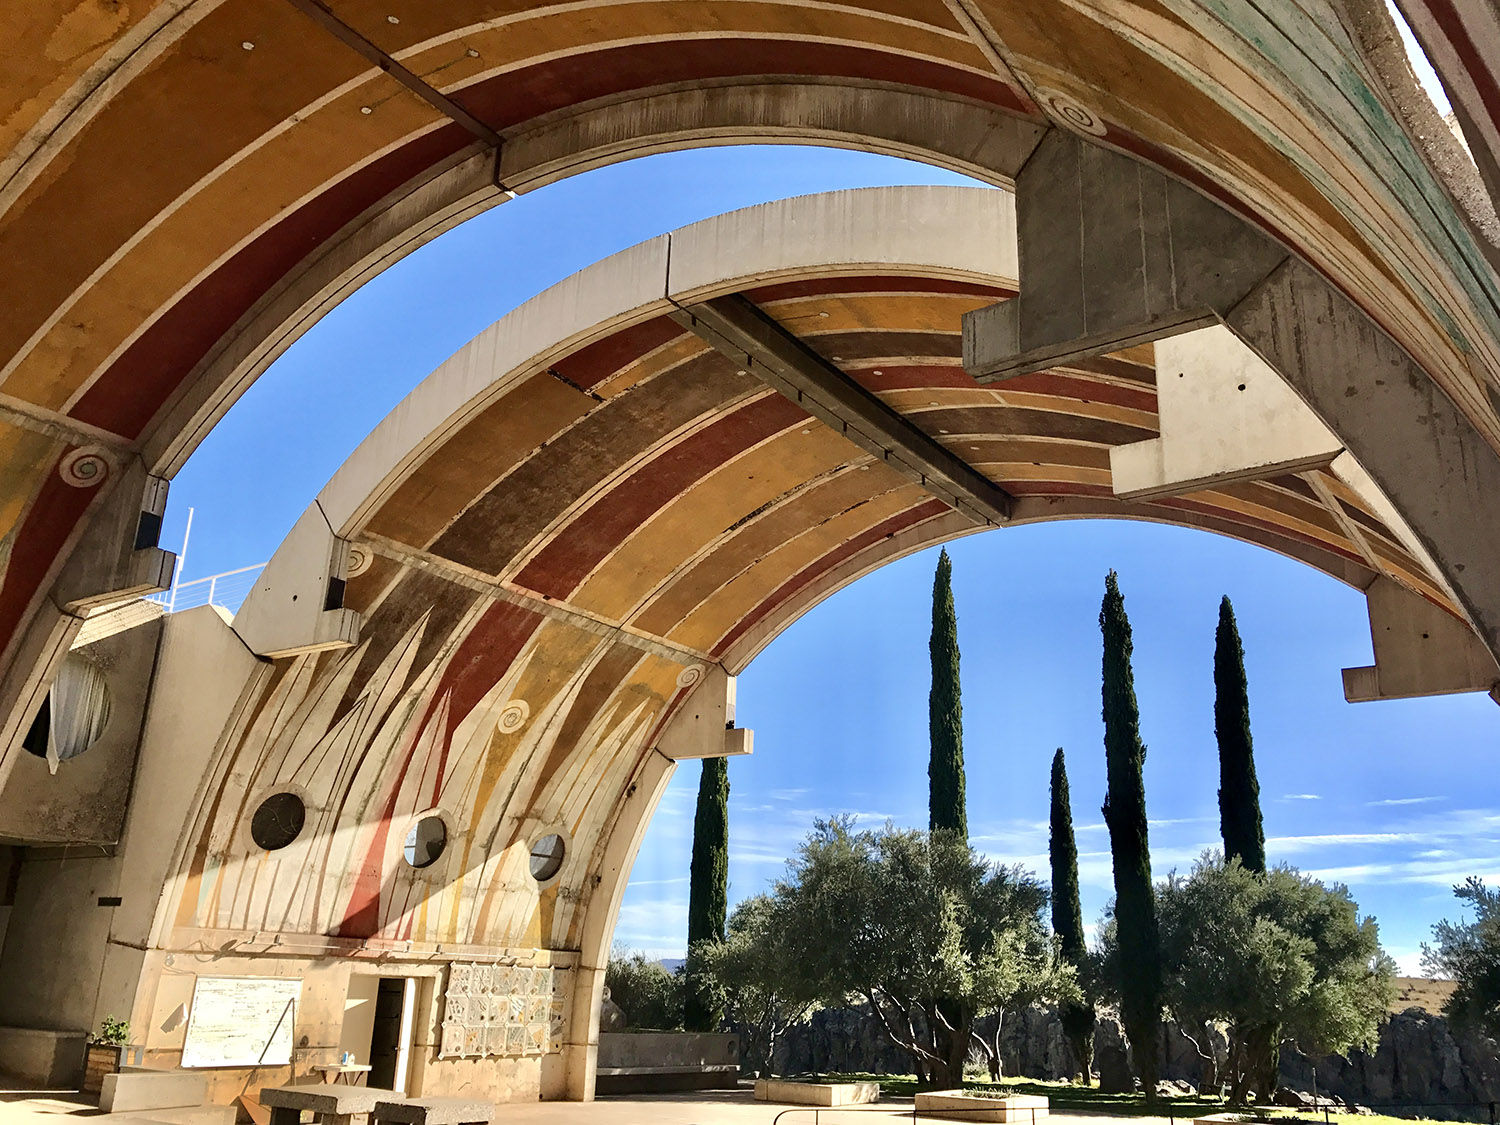 Arch structures with a beige and rust color scheme